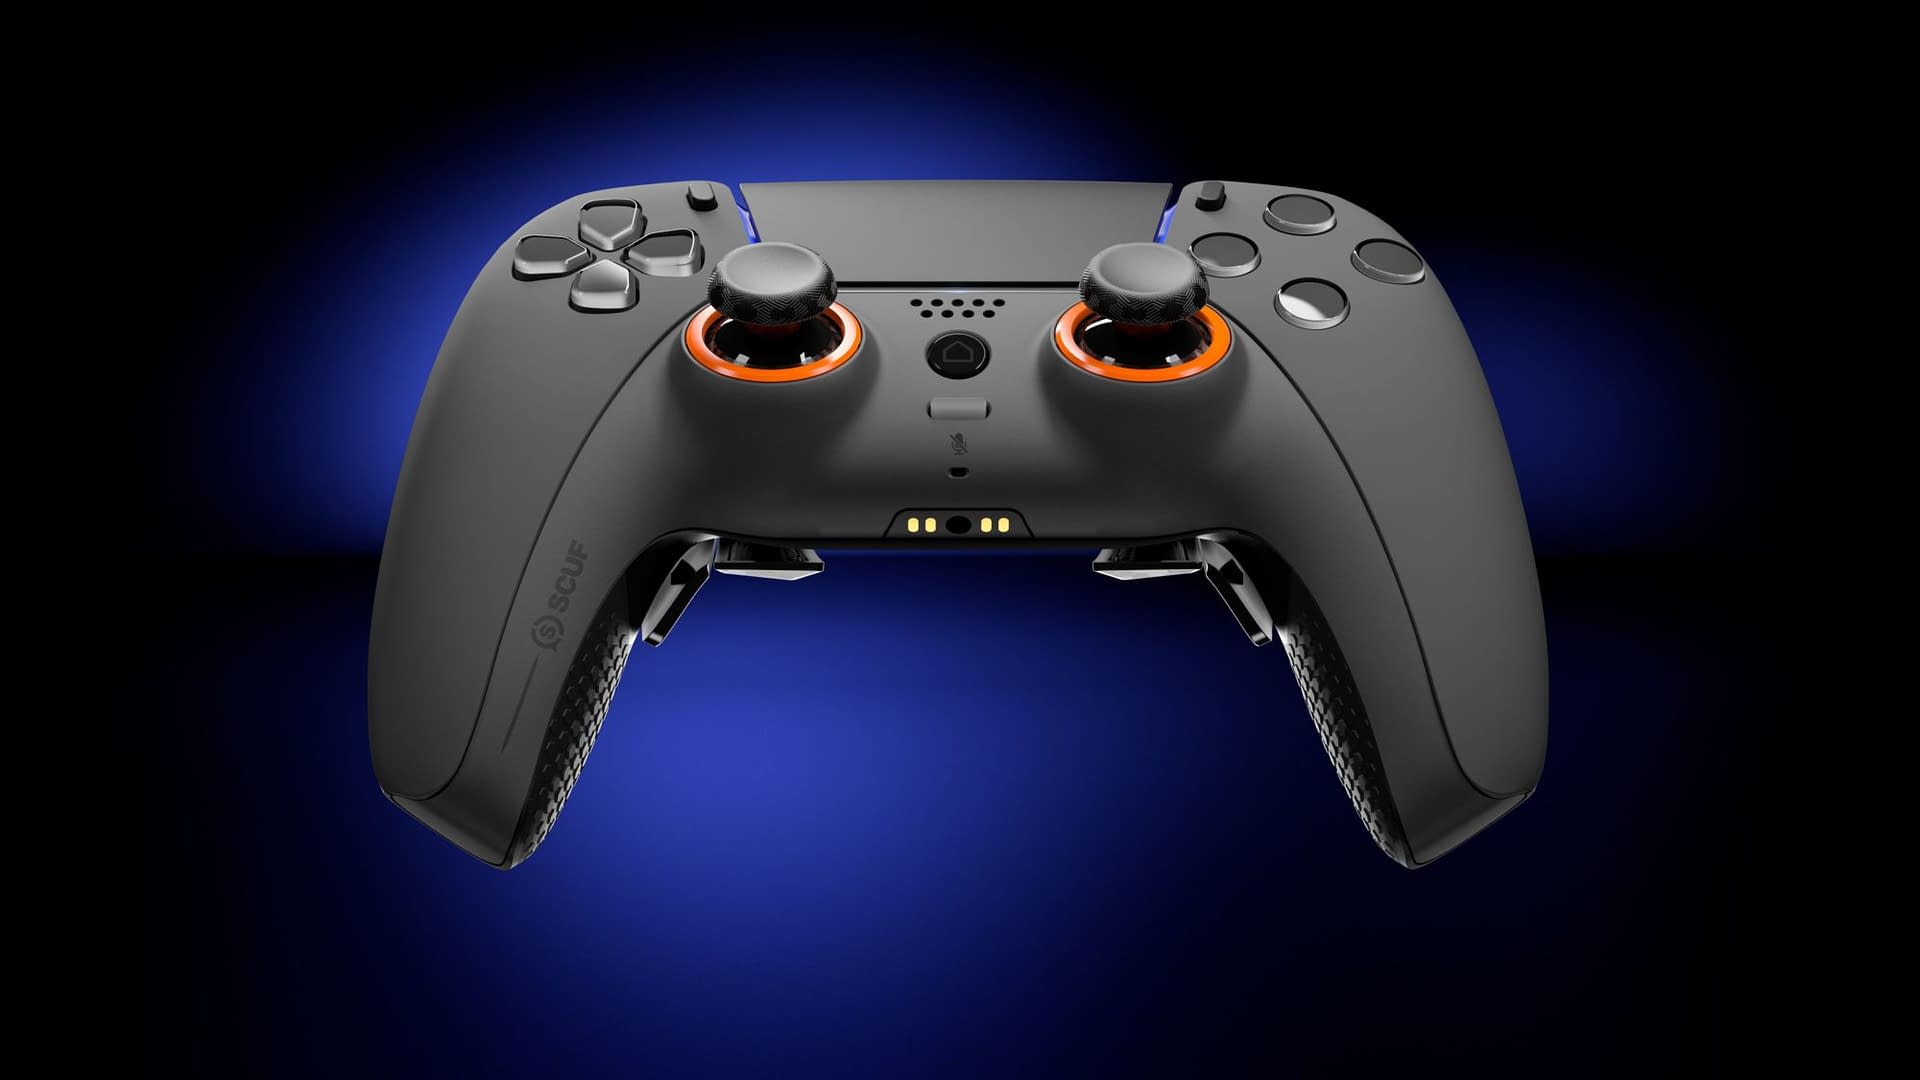 Scuf's first PS5 controllers include one built for first-person shooters